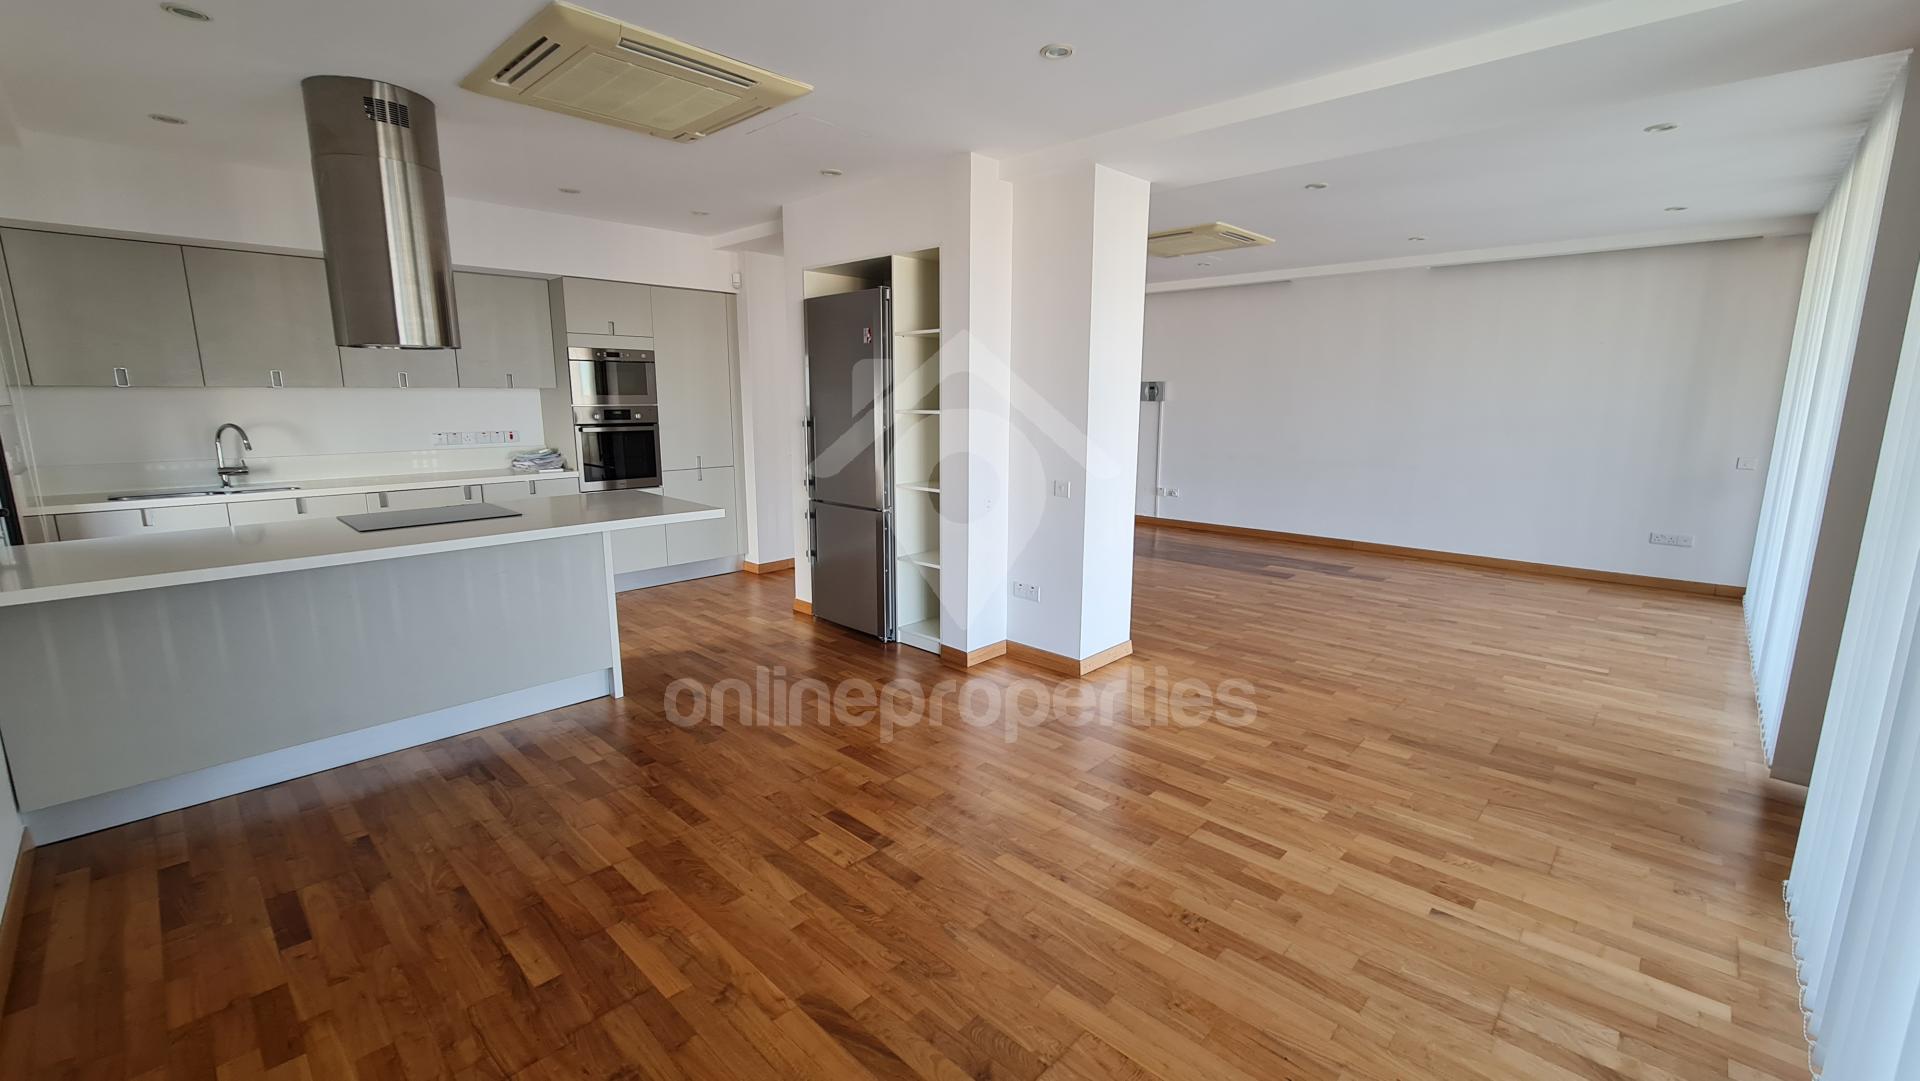 Top floor spacious 4 Bedroom Apartment with roof terrace